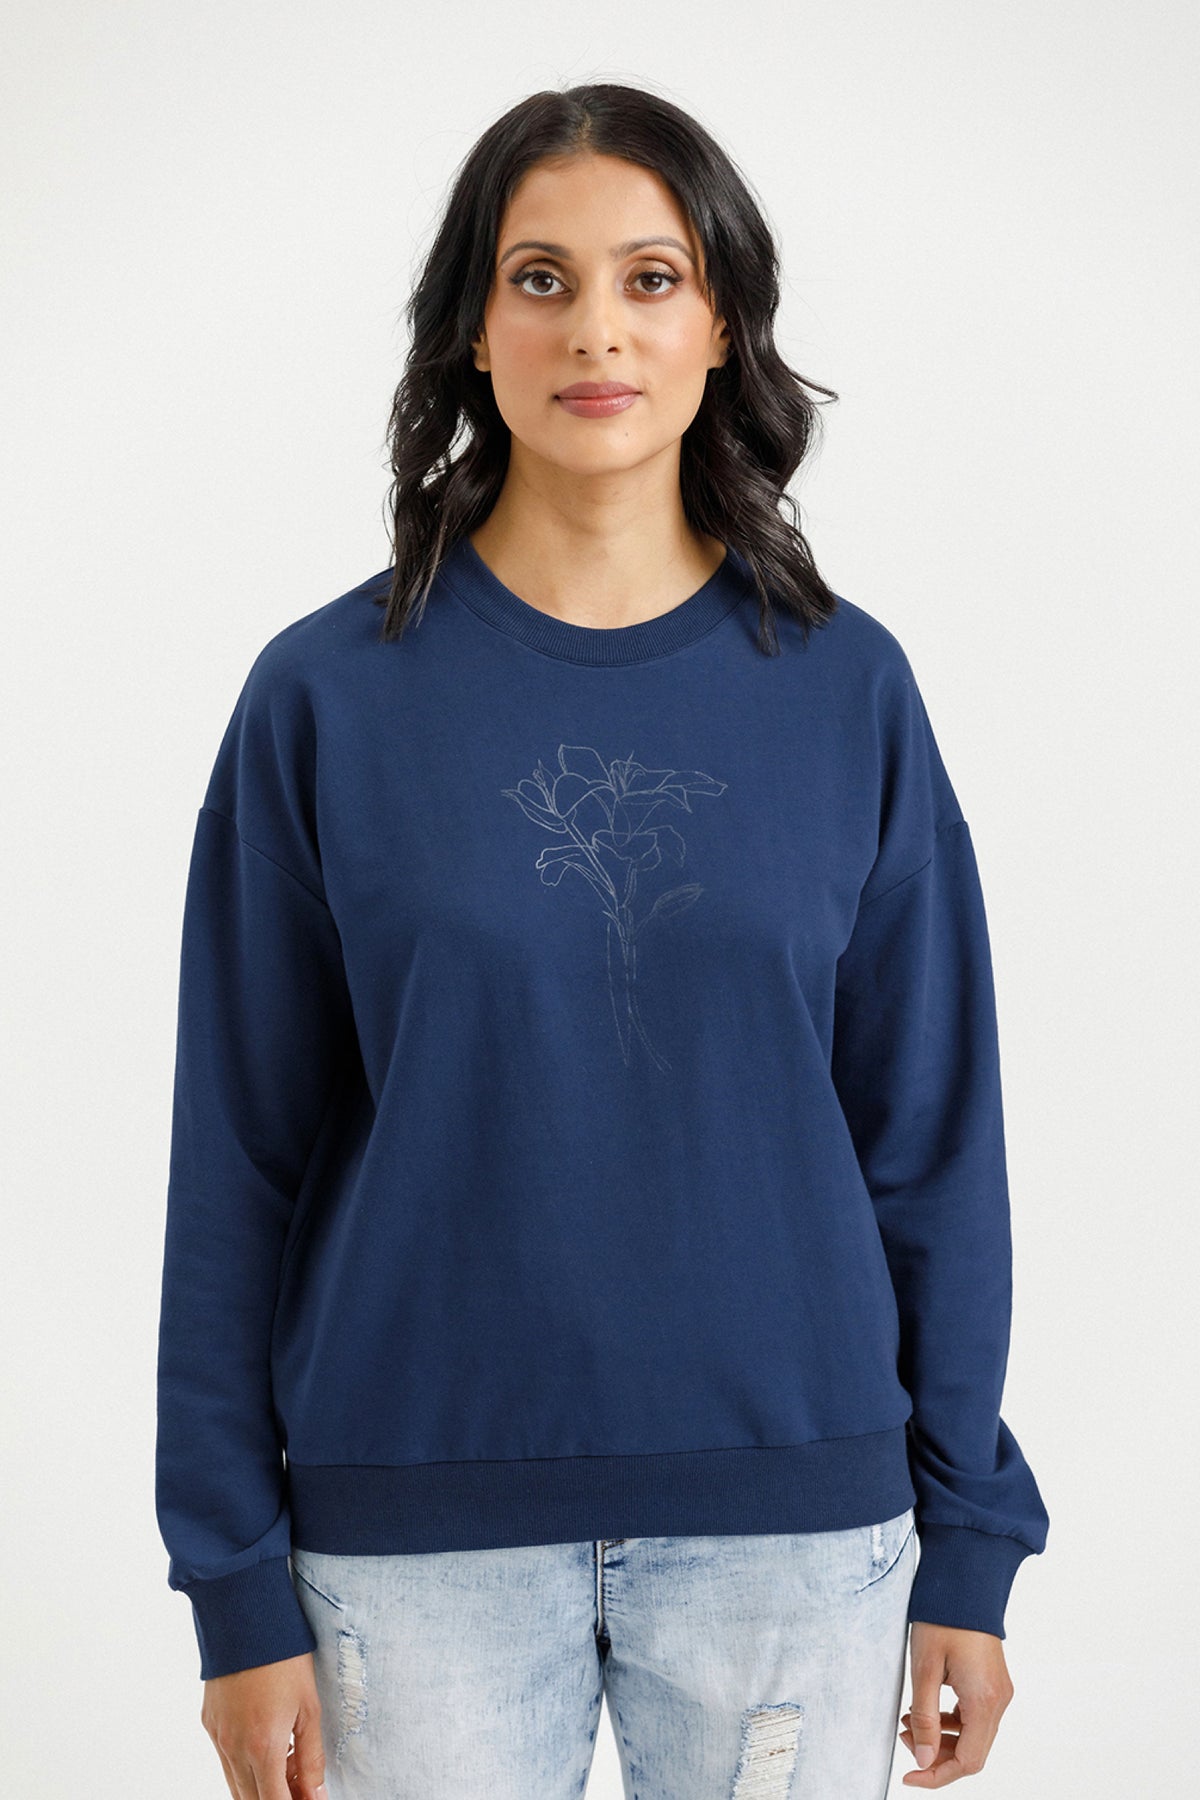 Camilia Crew Indigo Blue With Tonal Floral Print - PREORDER DELIVERY EARLY JUNE